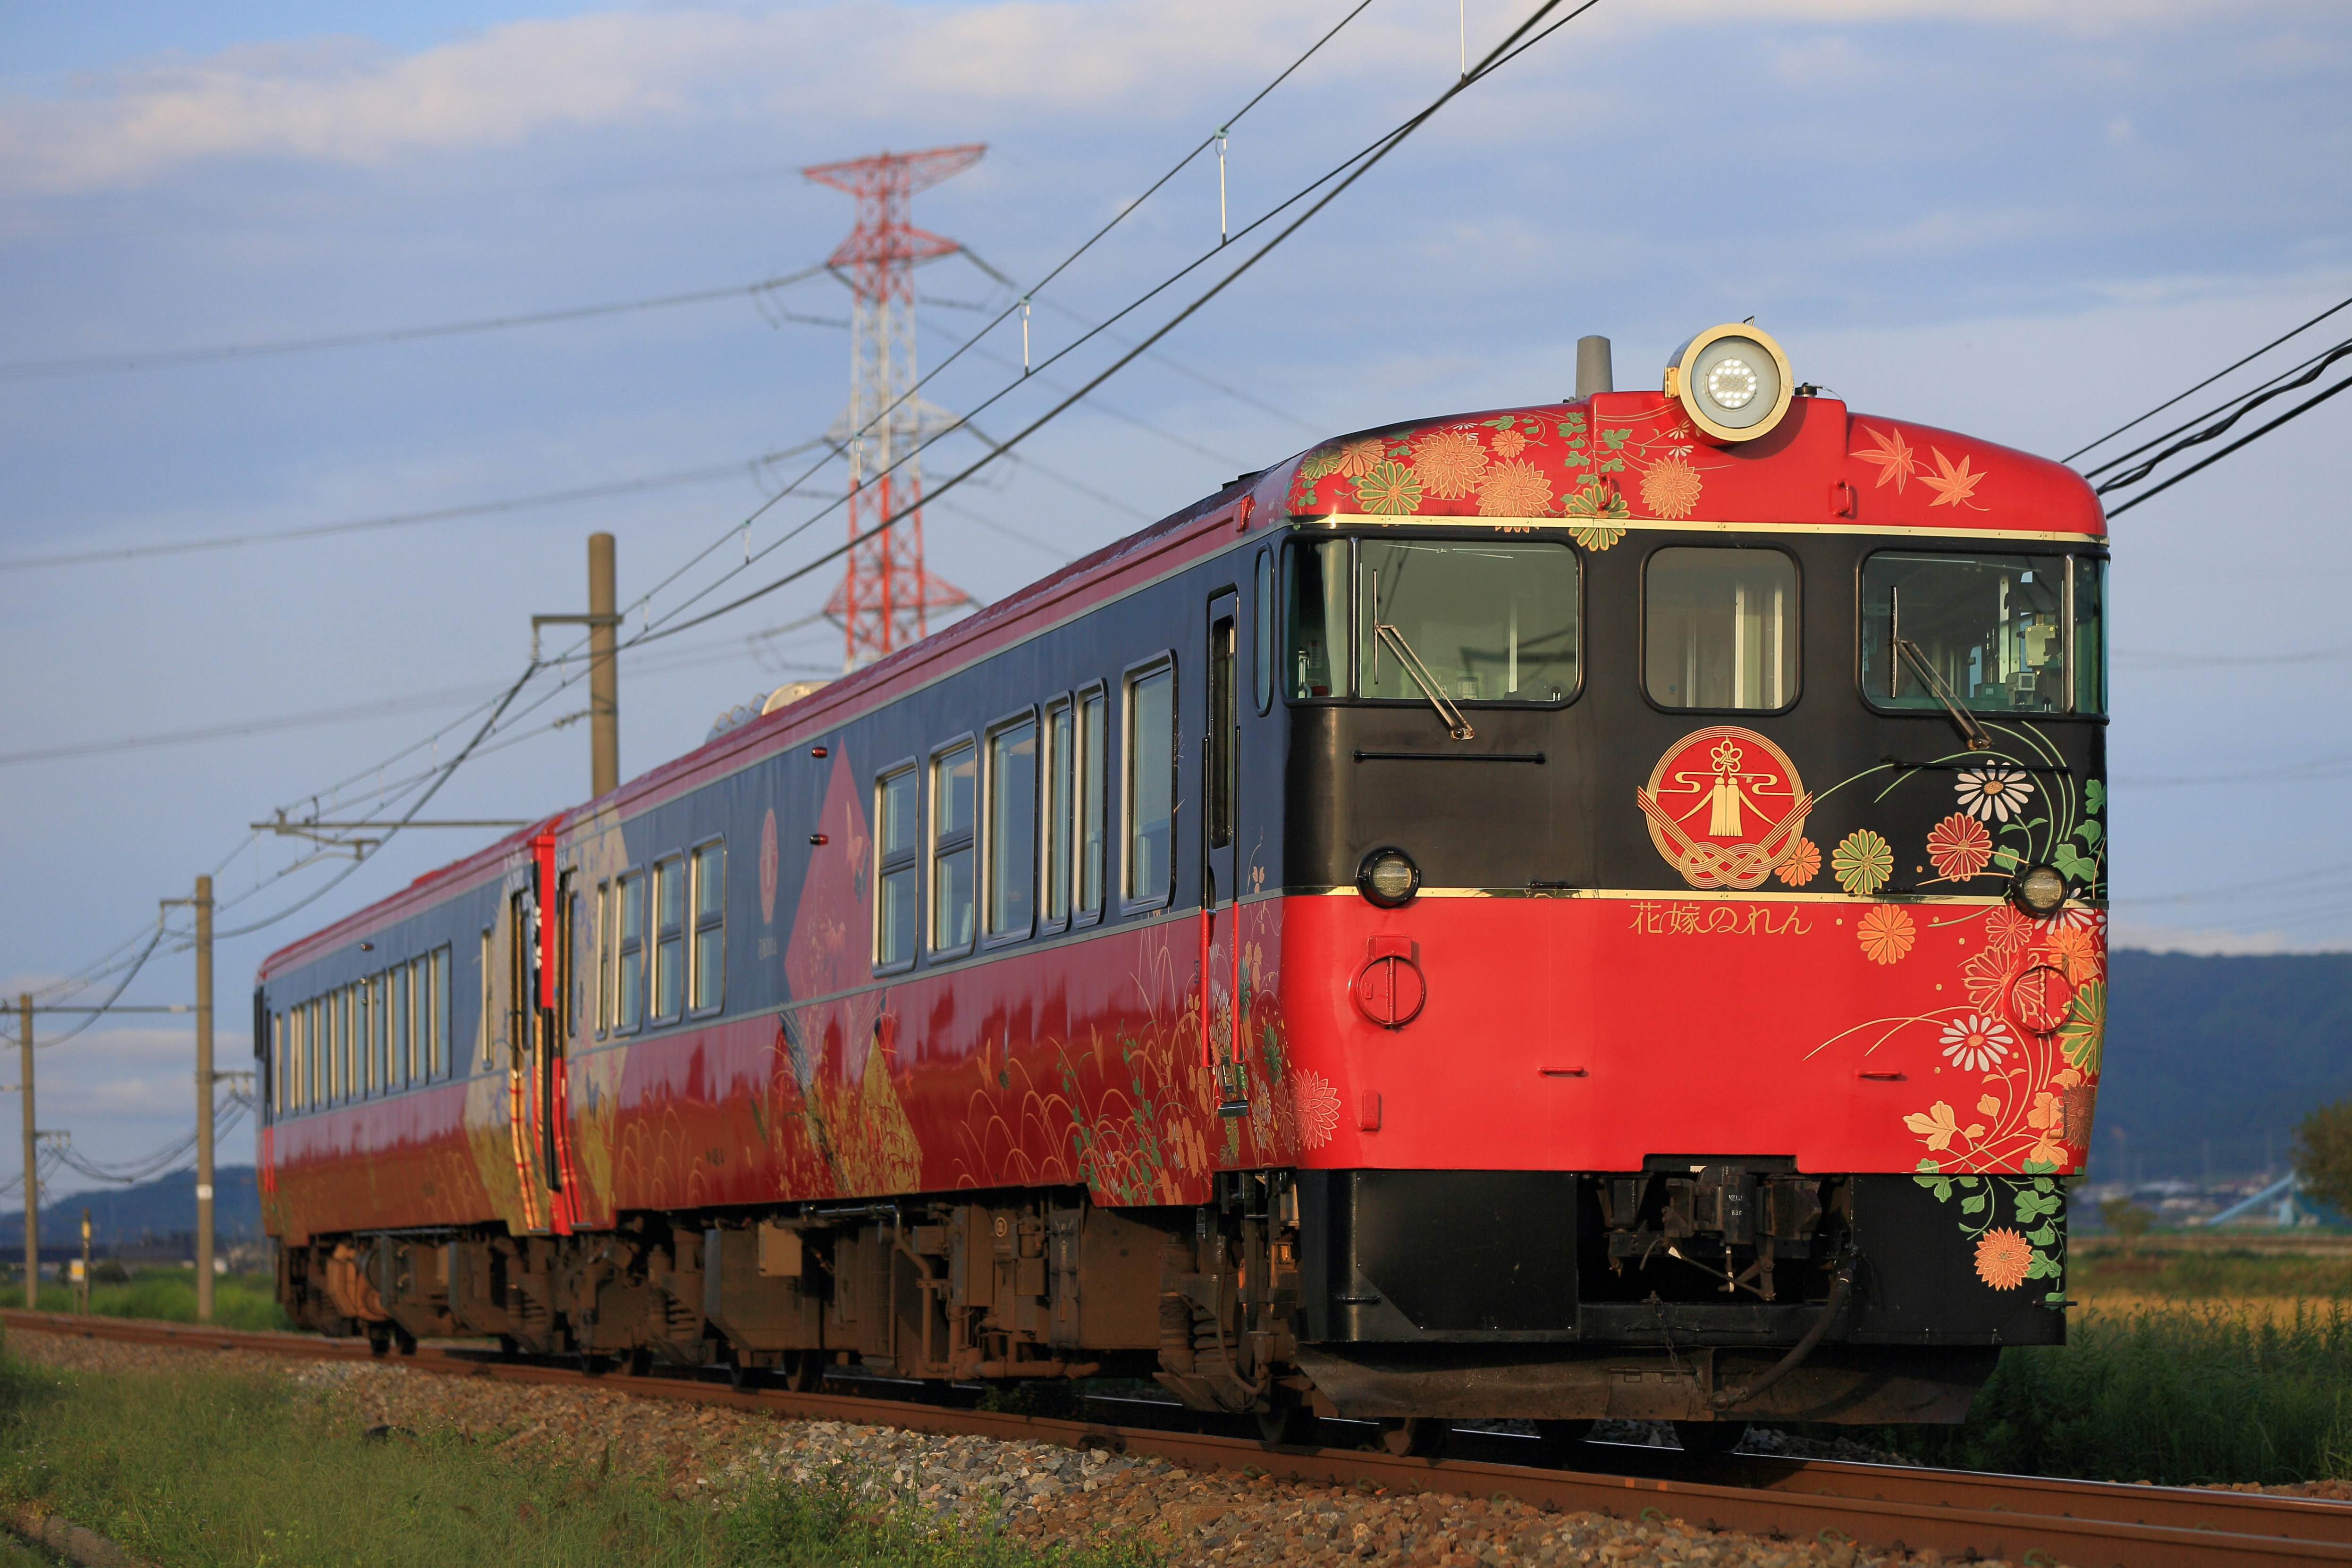 A red train runs along tracks through the Japanese countryside. Green fields are visible beyond it.